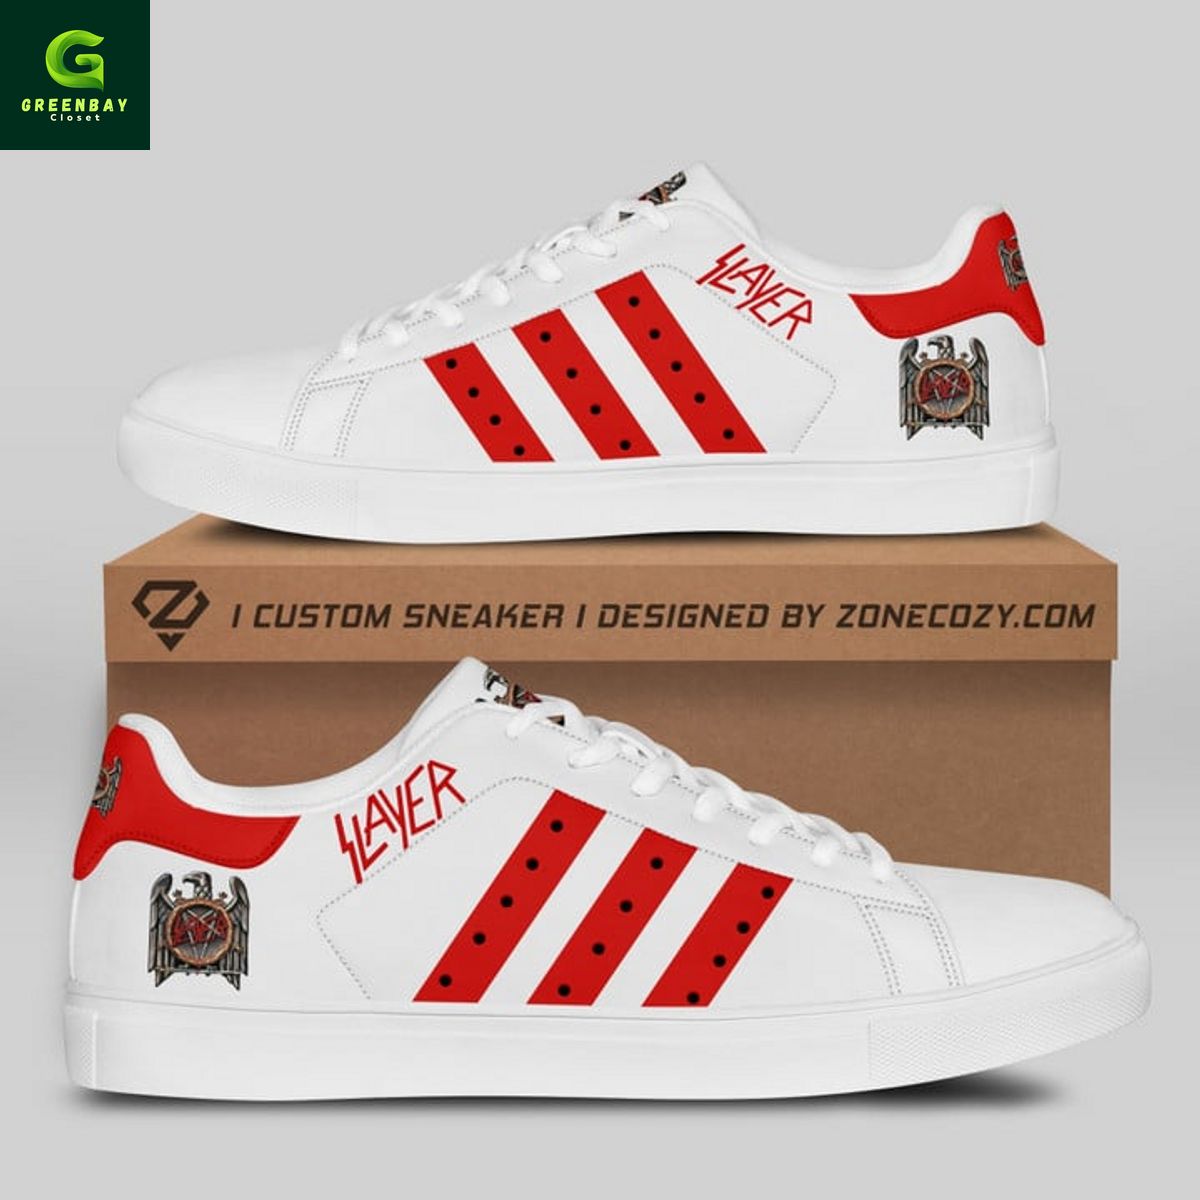 Free Shipping] Slayer adidas stan smith shoes